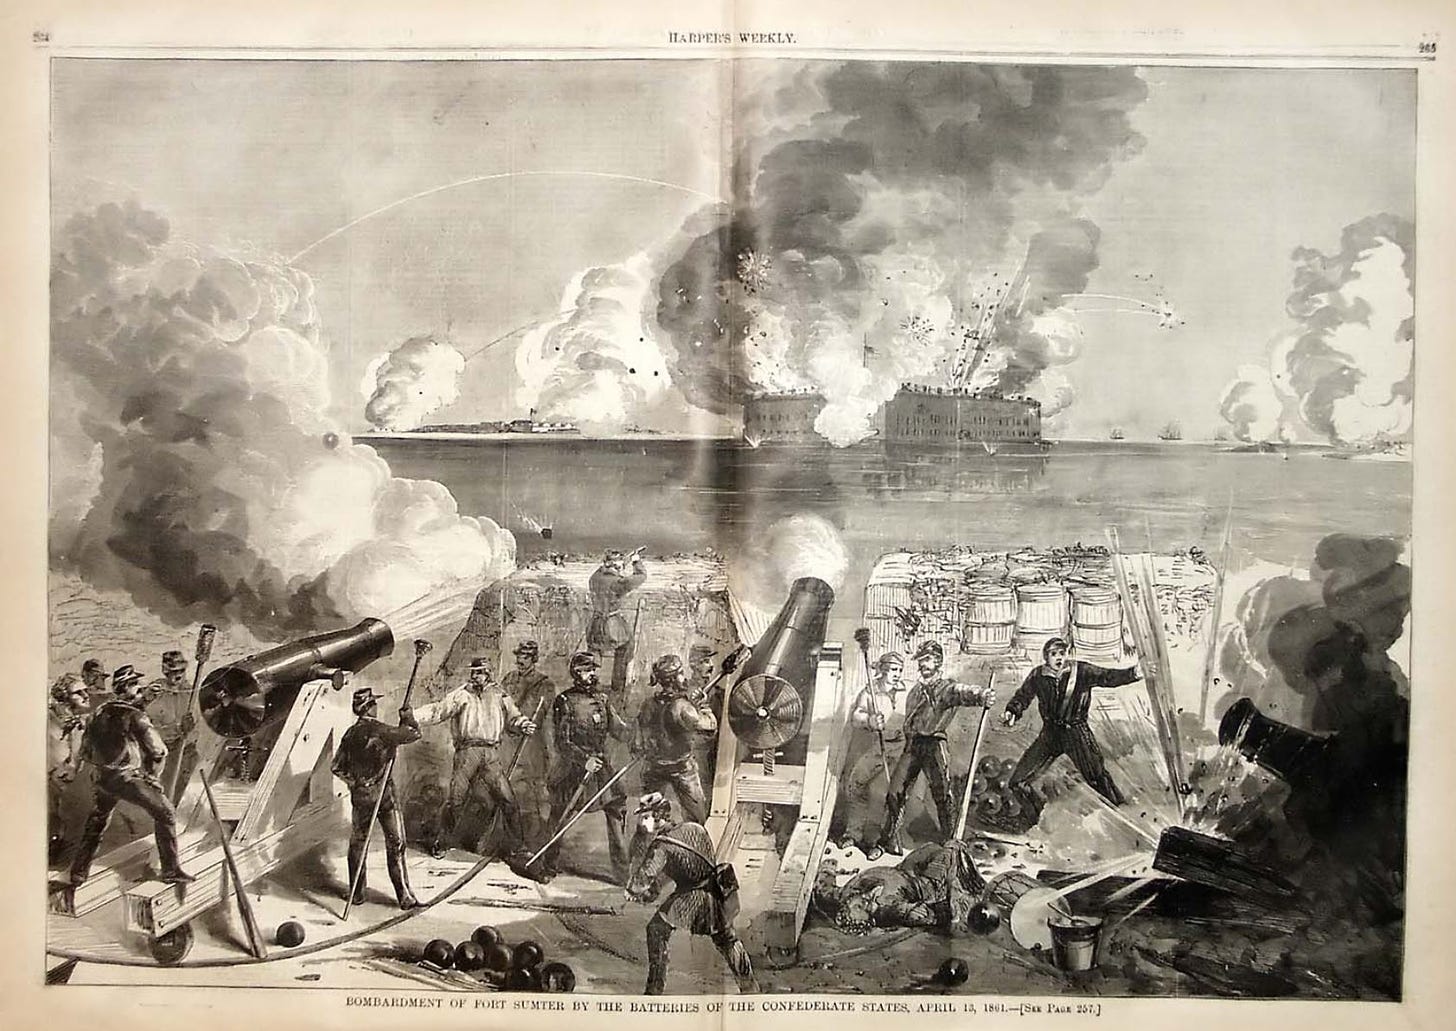 "Bombardment of Fort Sumter by the Batteries of the Confederate States, April 12, 1861 (Harpers Weekly print)